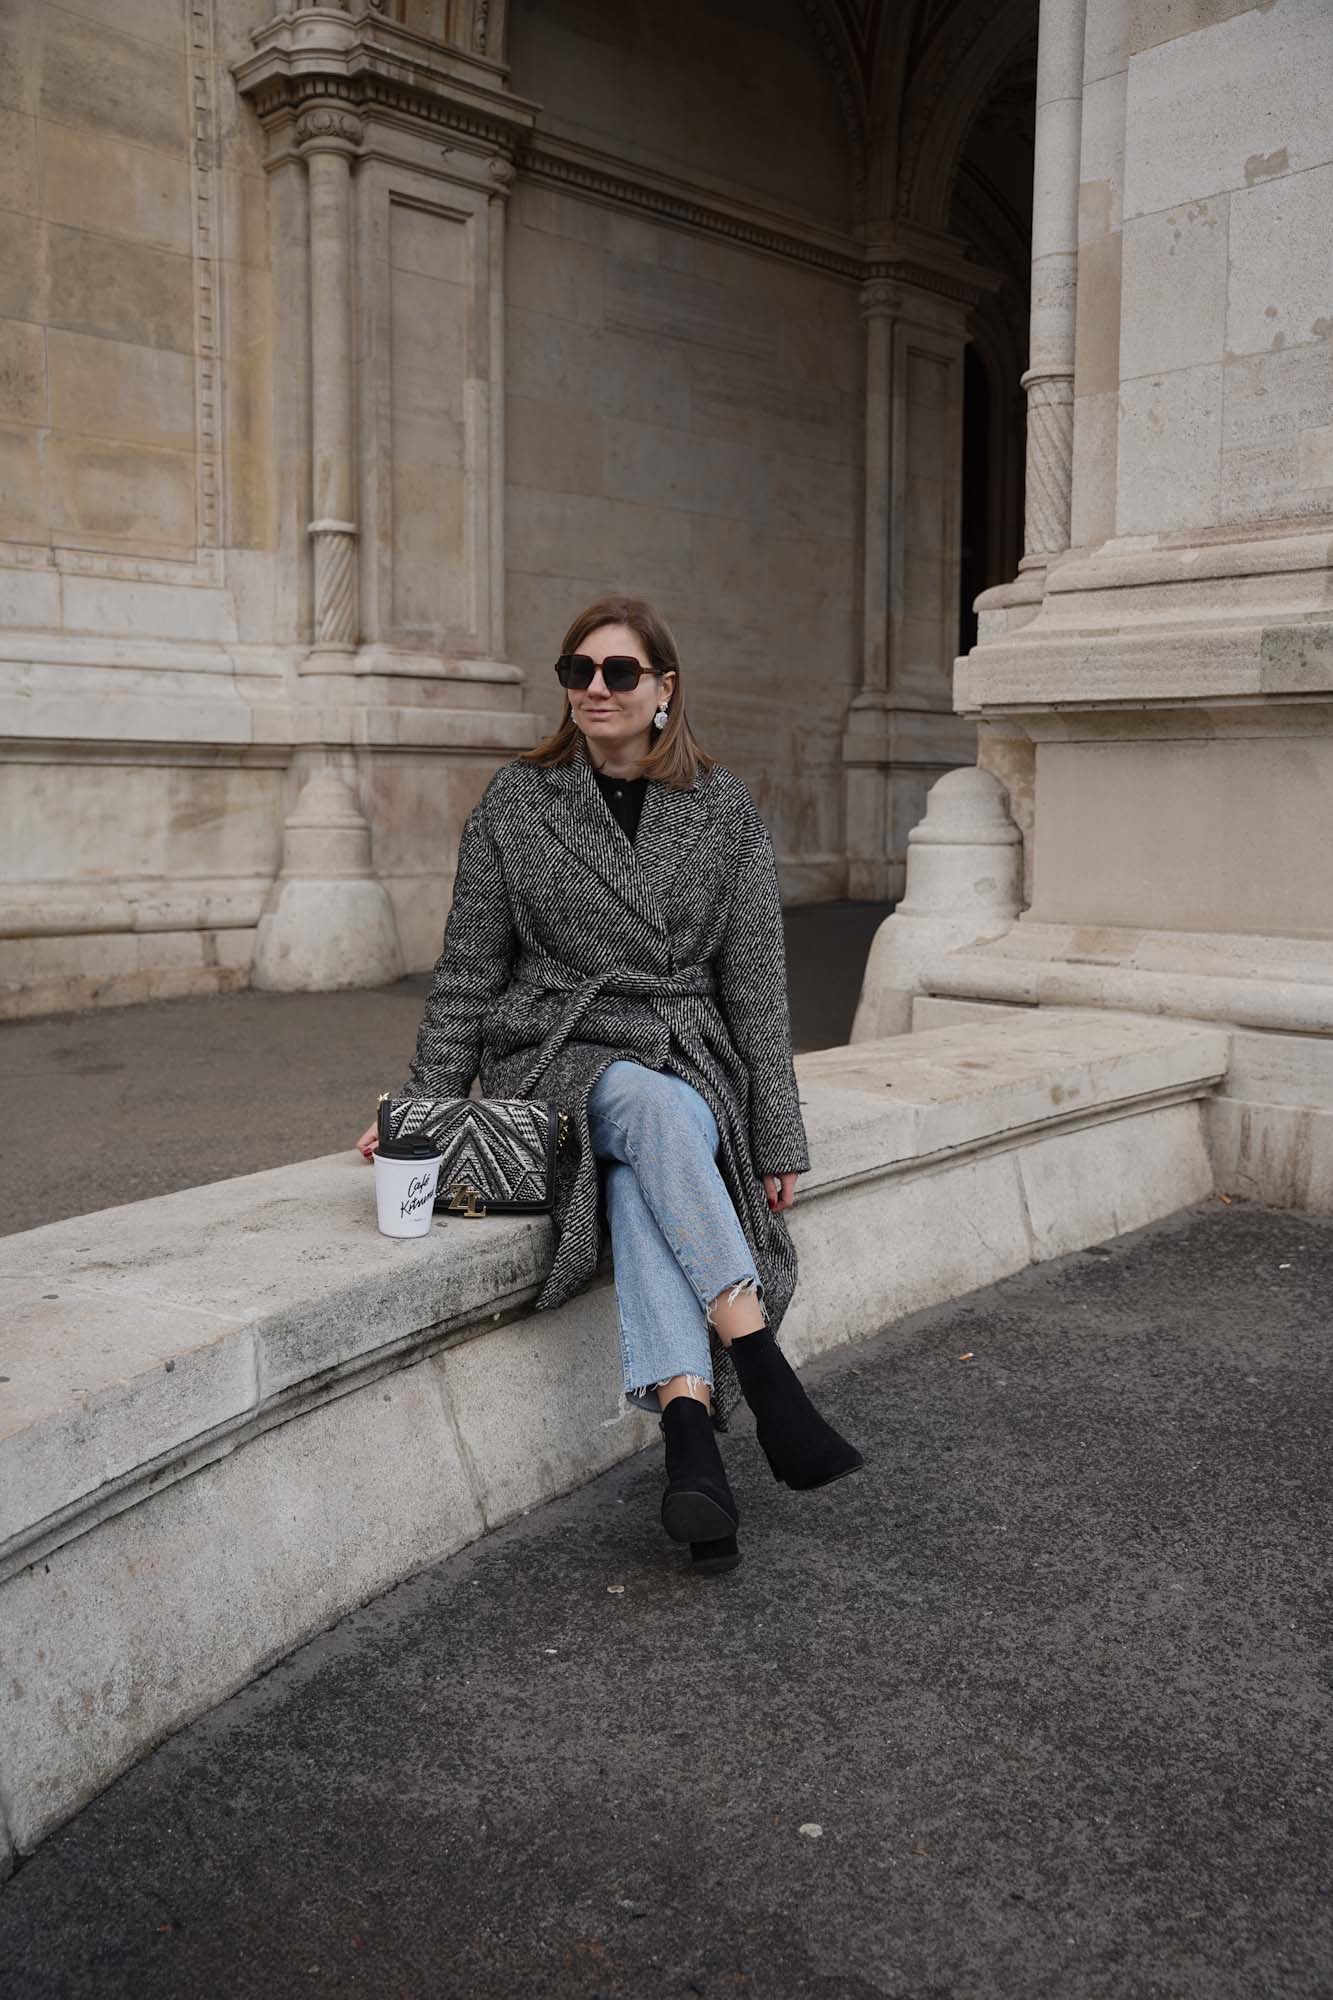 Winter coat, jeans, black boots, Stiefeletten, casual, outfit winter Vienna city